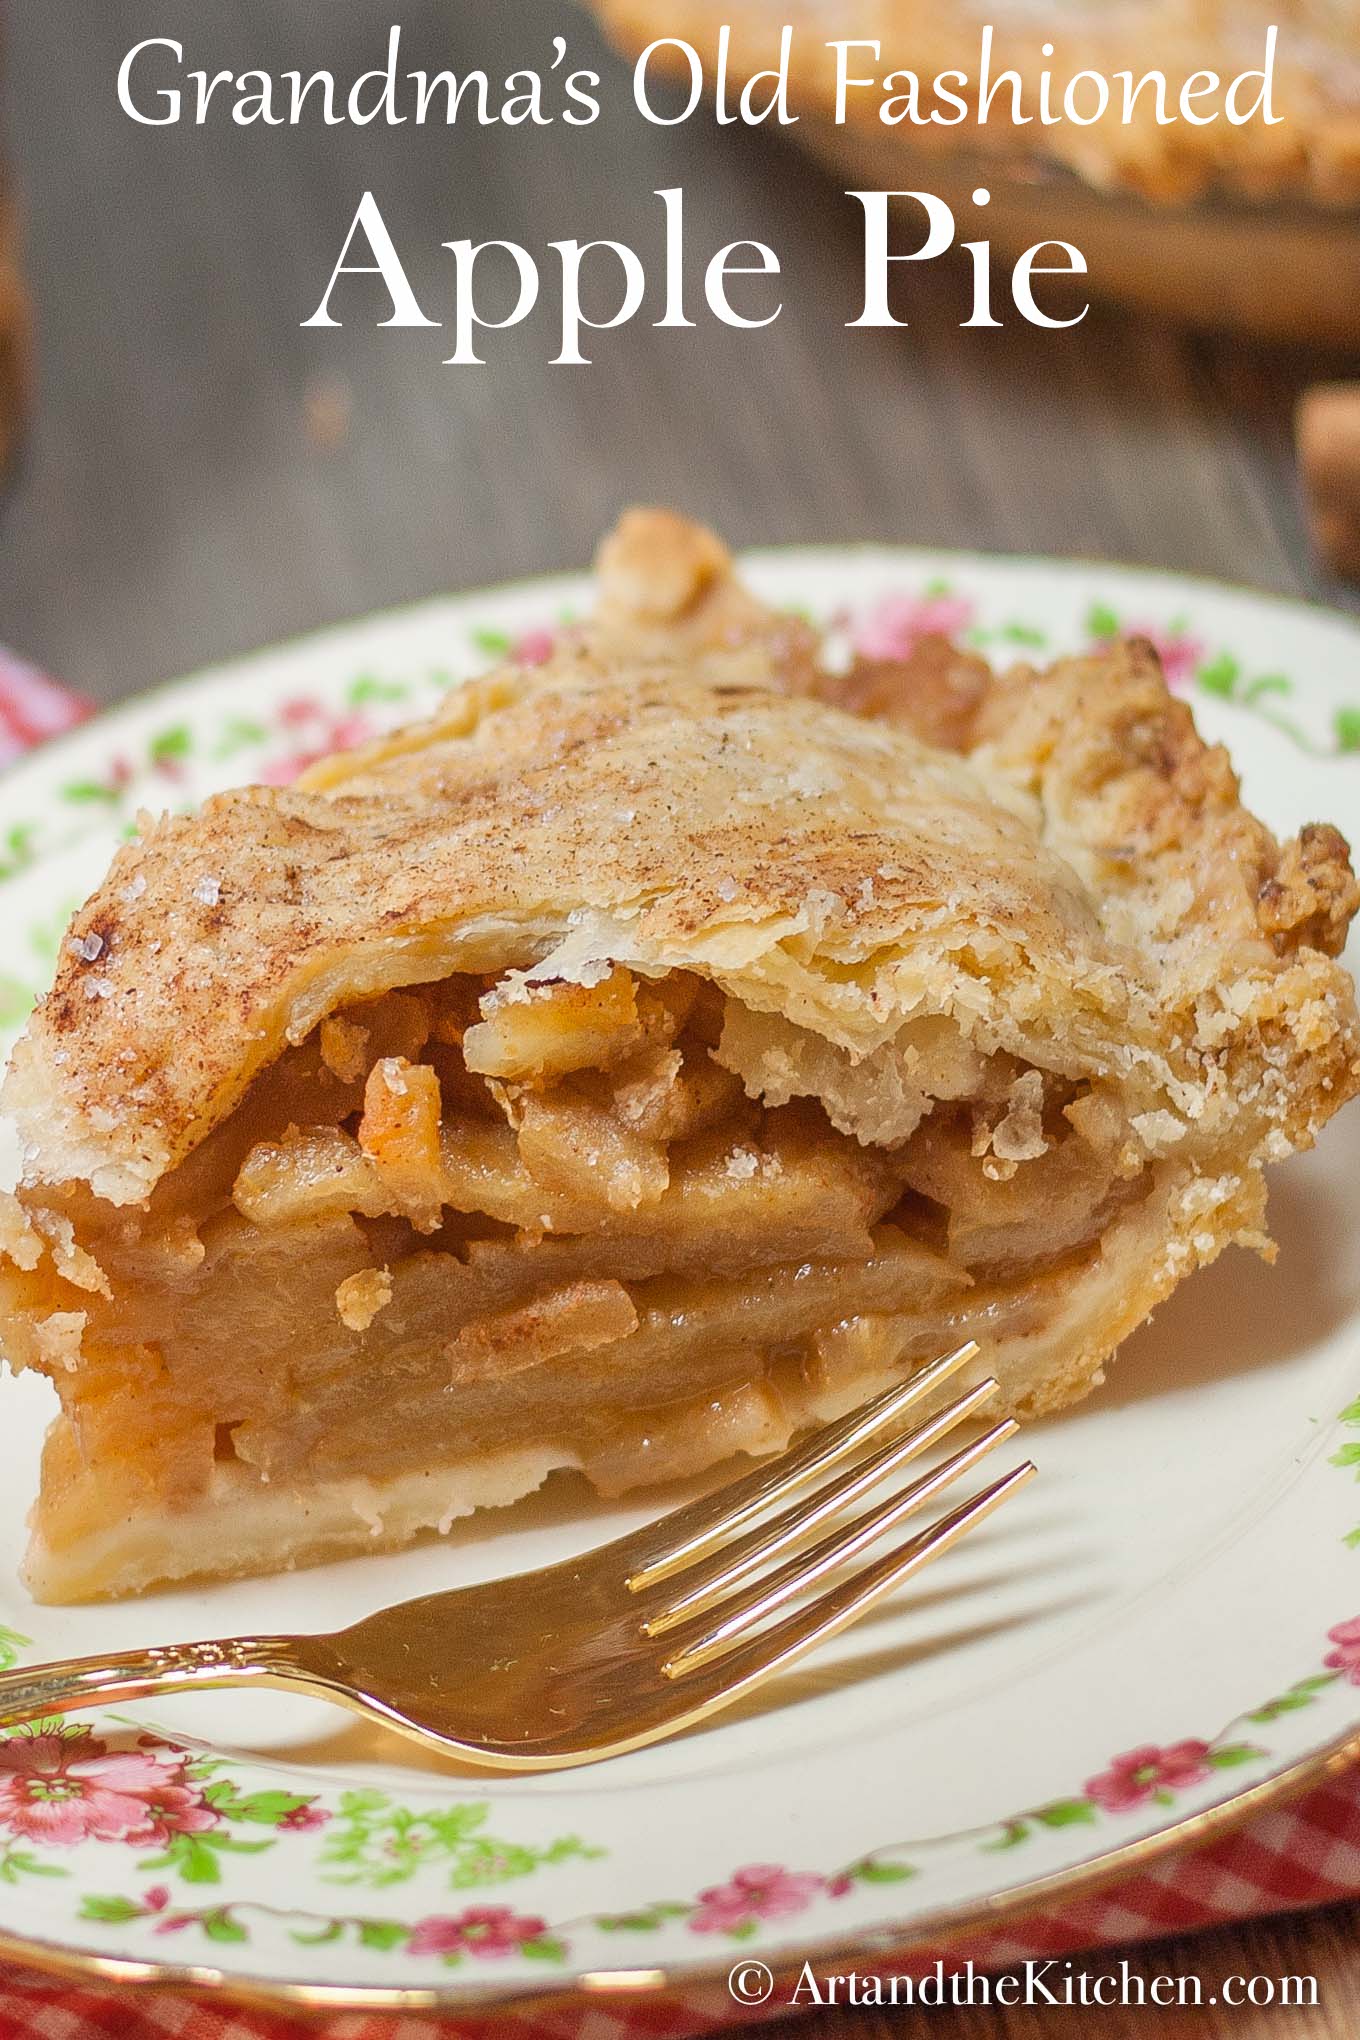 Slice of apple pie on decorative plate with gold plated fork.